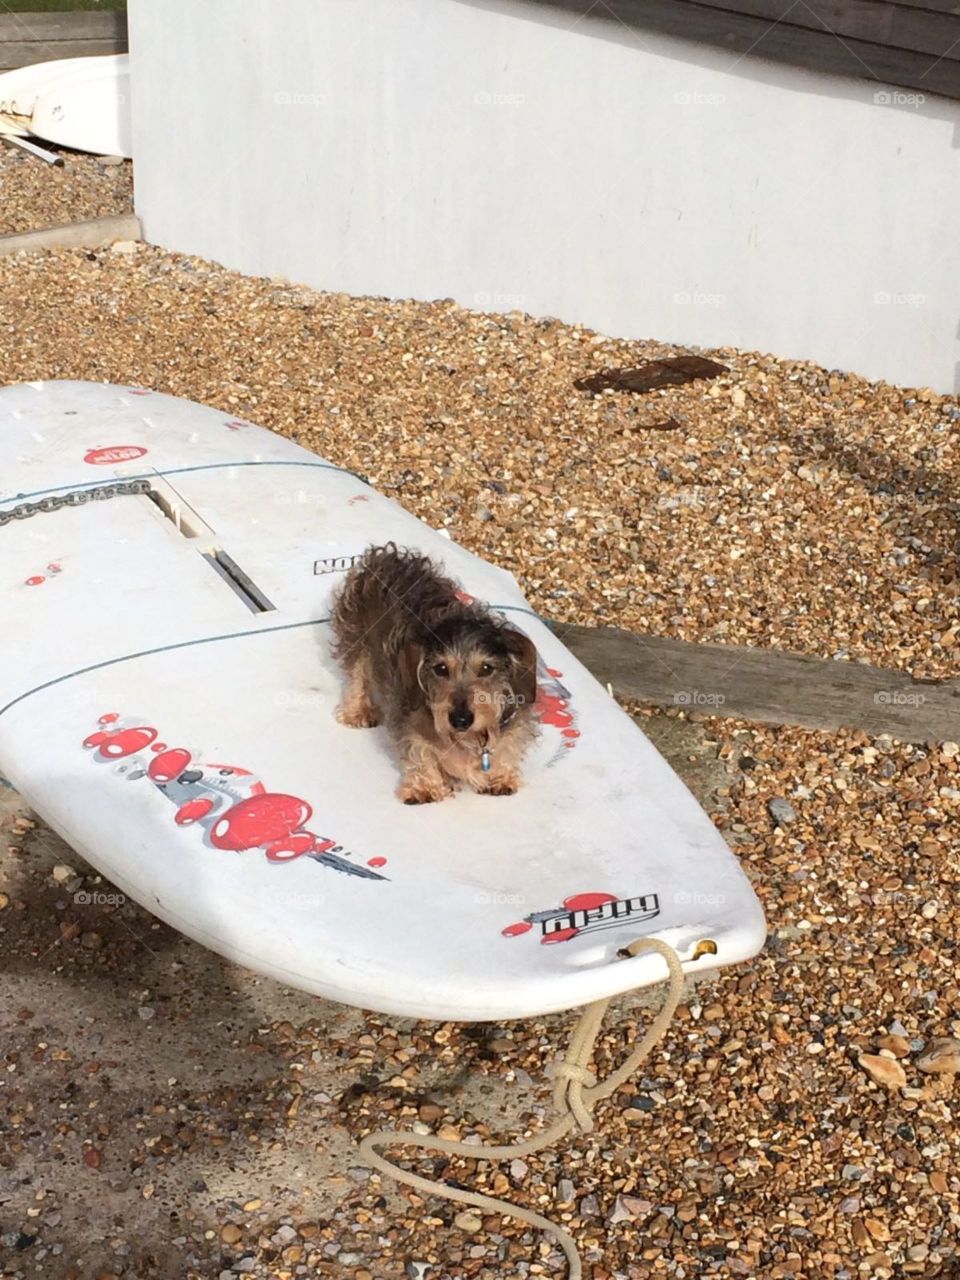 Little rocky at the beach on a surf board ❤️